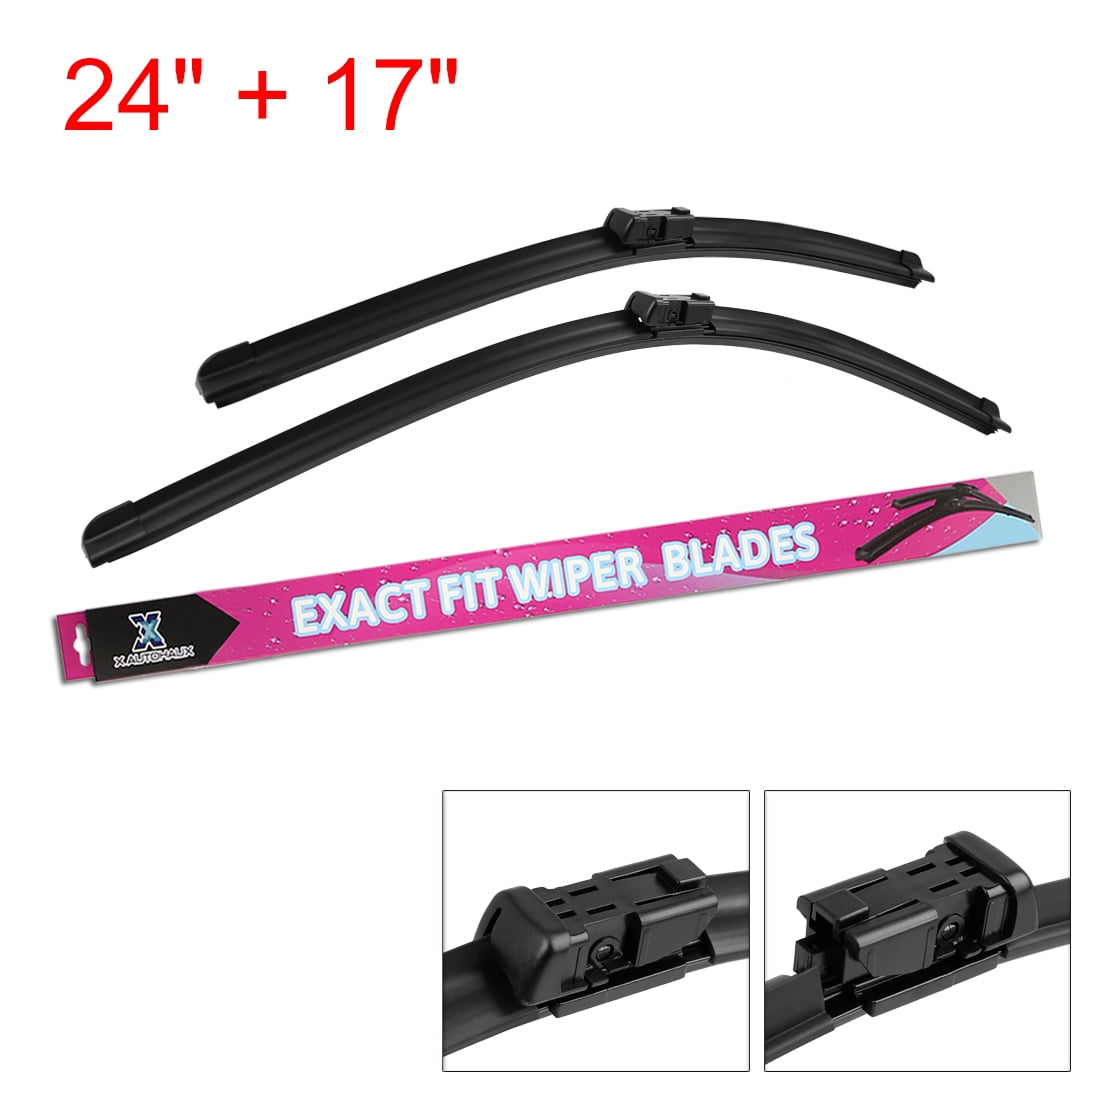 Unique Bargain Exact Fit Windshield Wiper Blades For 2011-2016 Chevy Equinox - Walmart.com Windshield Wiper Size For 2016 Chevy Equinox